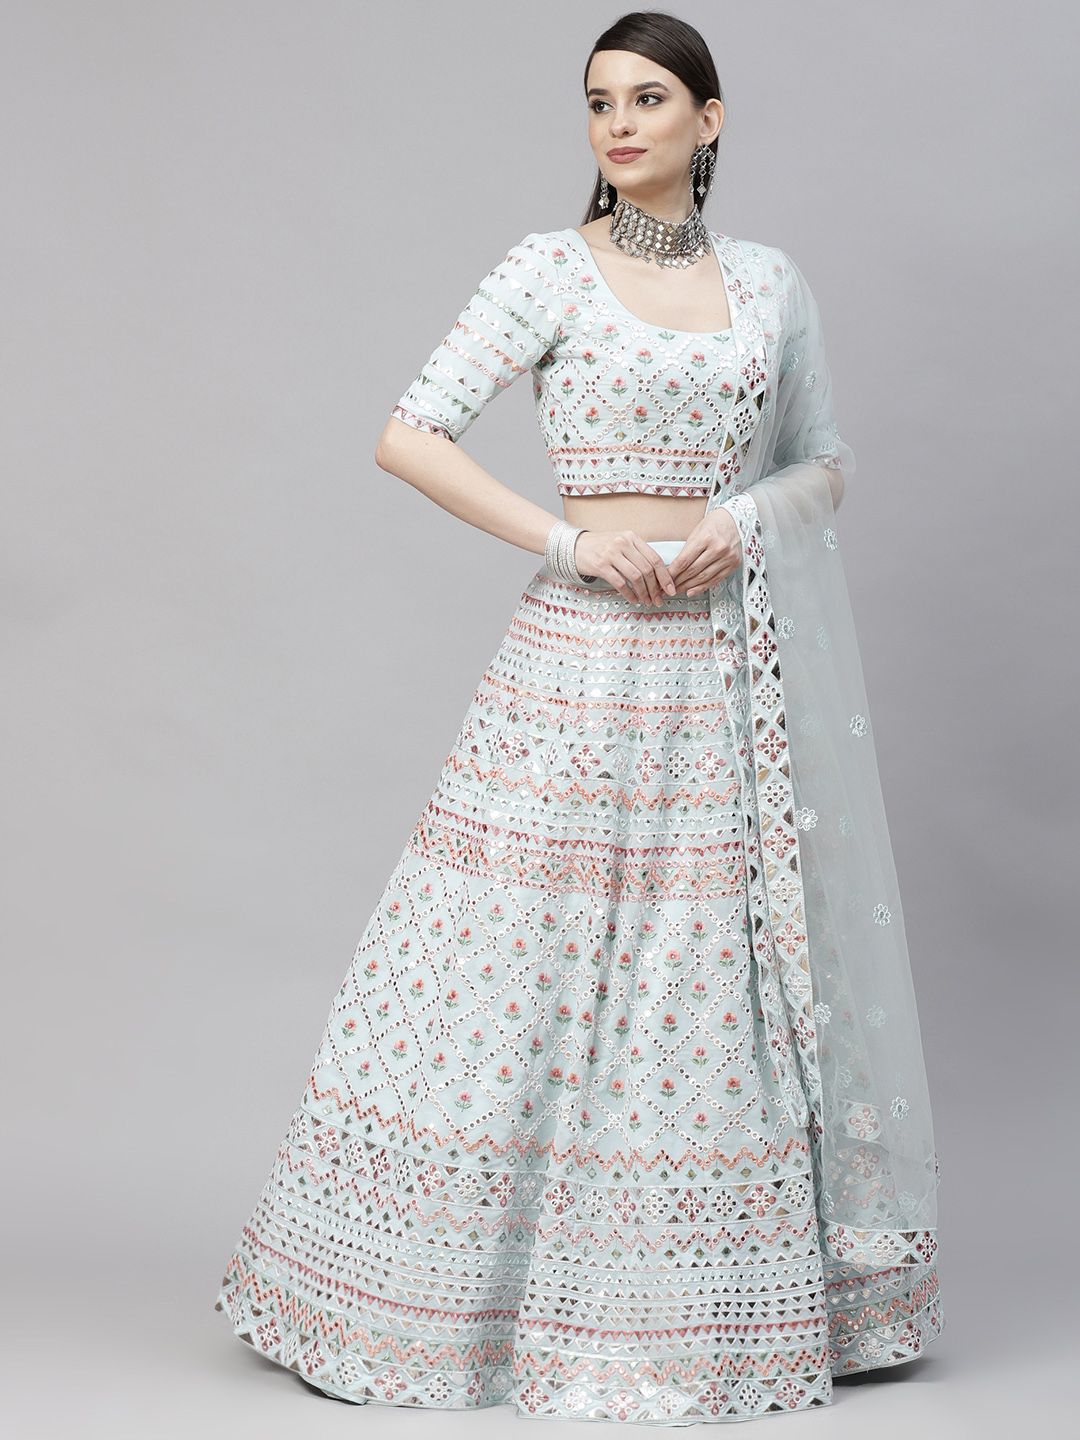 SHUBHKALA Turquoise Blue Embroidered Thread Work Semi-Stitched Lehenga & Unstitched Blouse With Dupatta Price in India